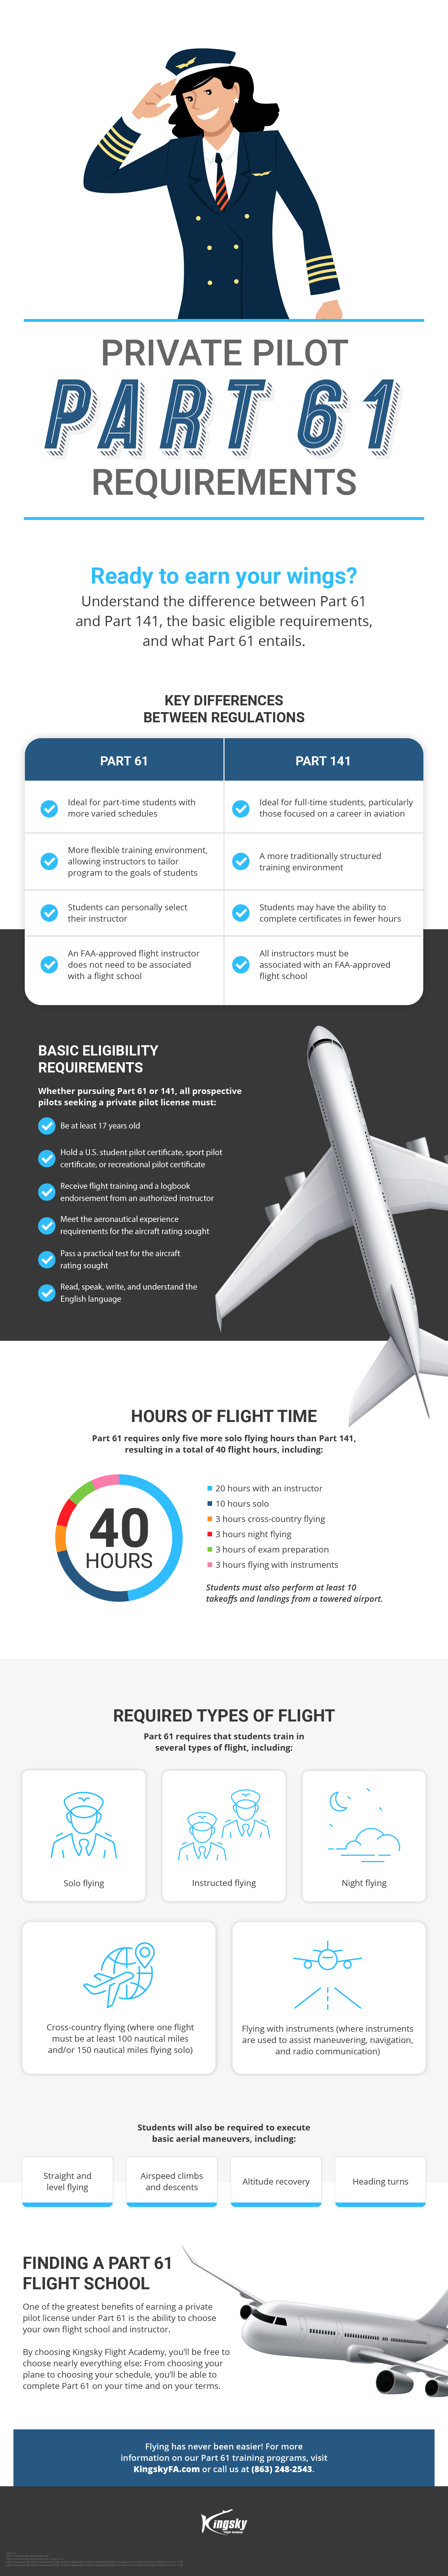 Private Pilot Part 61 Requirements Infographic